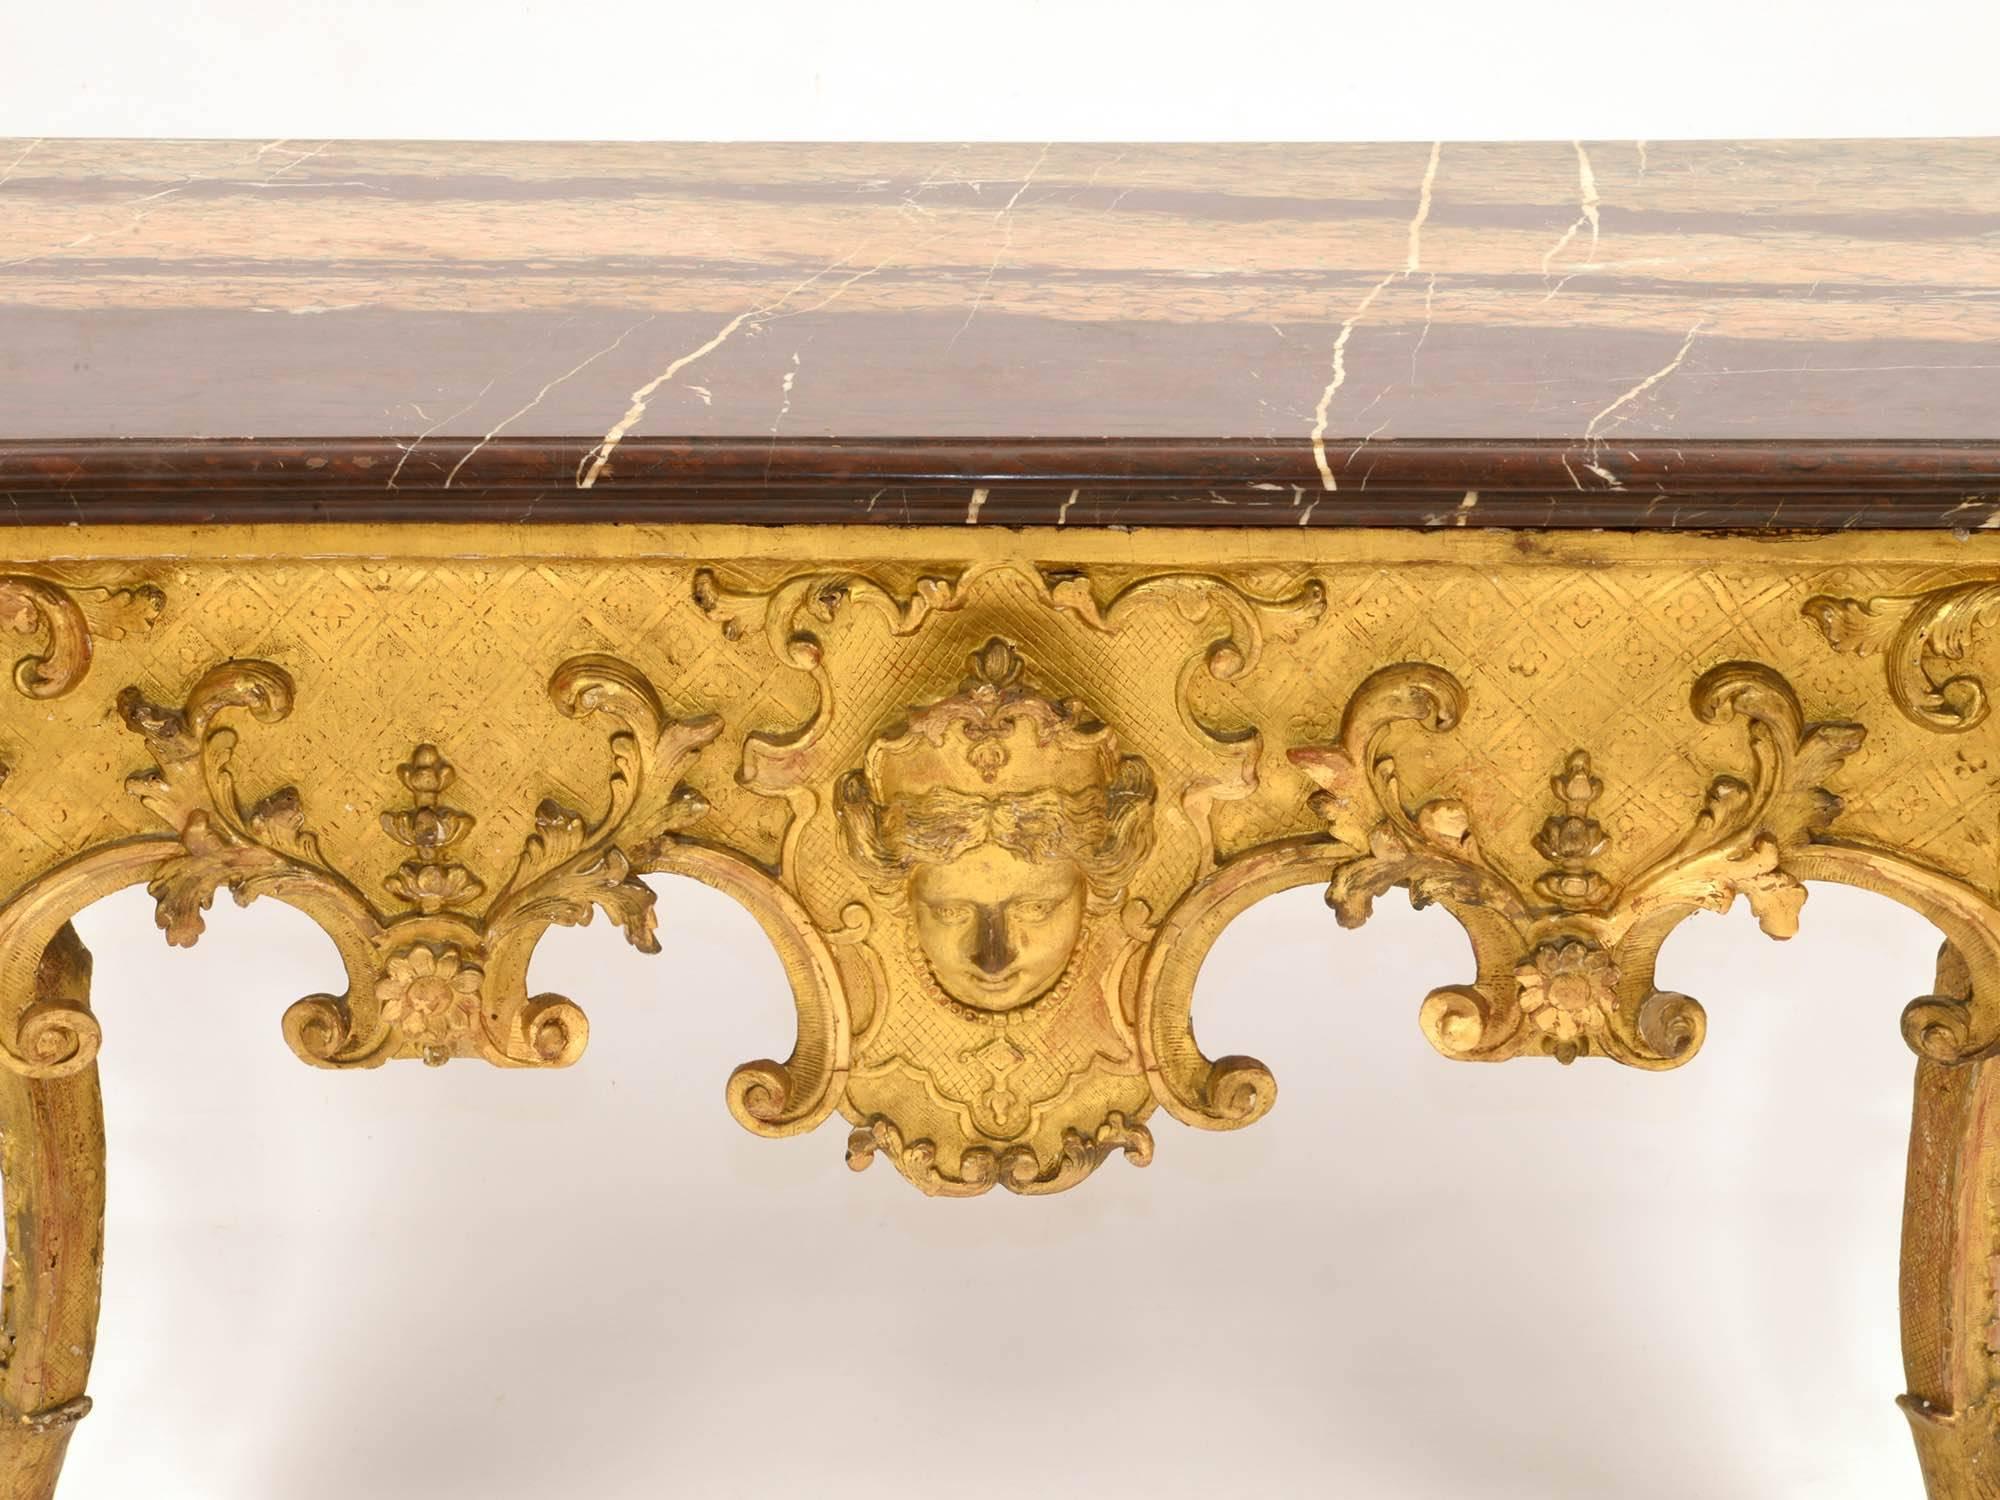 Original Regency console
Louis XV era
Gilded and sculpted wood, red marble
France, 18th century
Measure: H 83 x W 124 x D 67 cm.